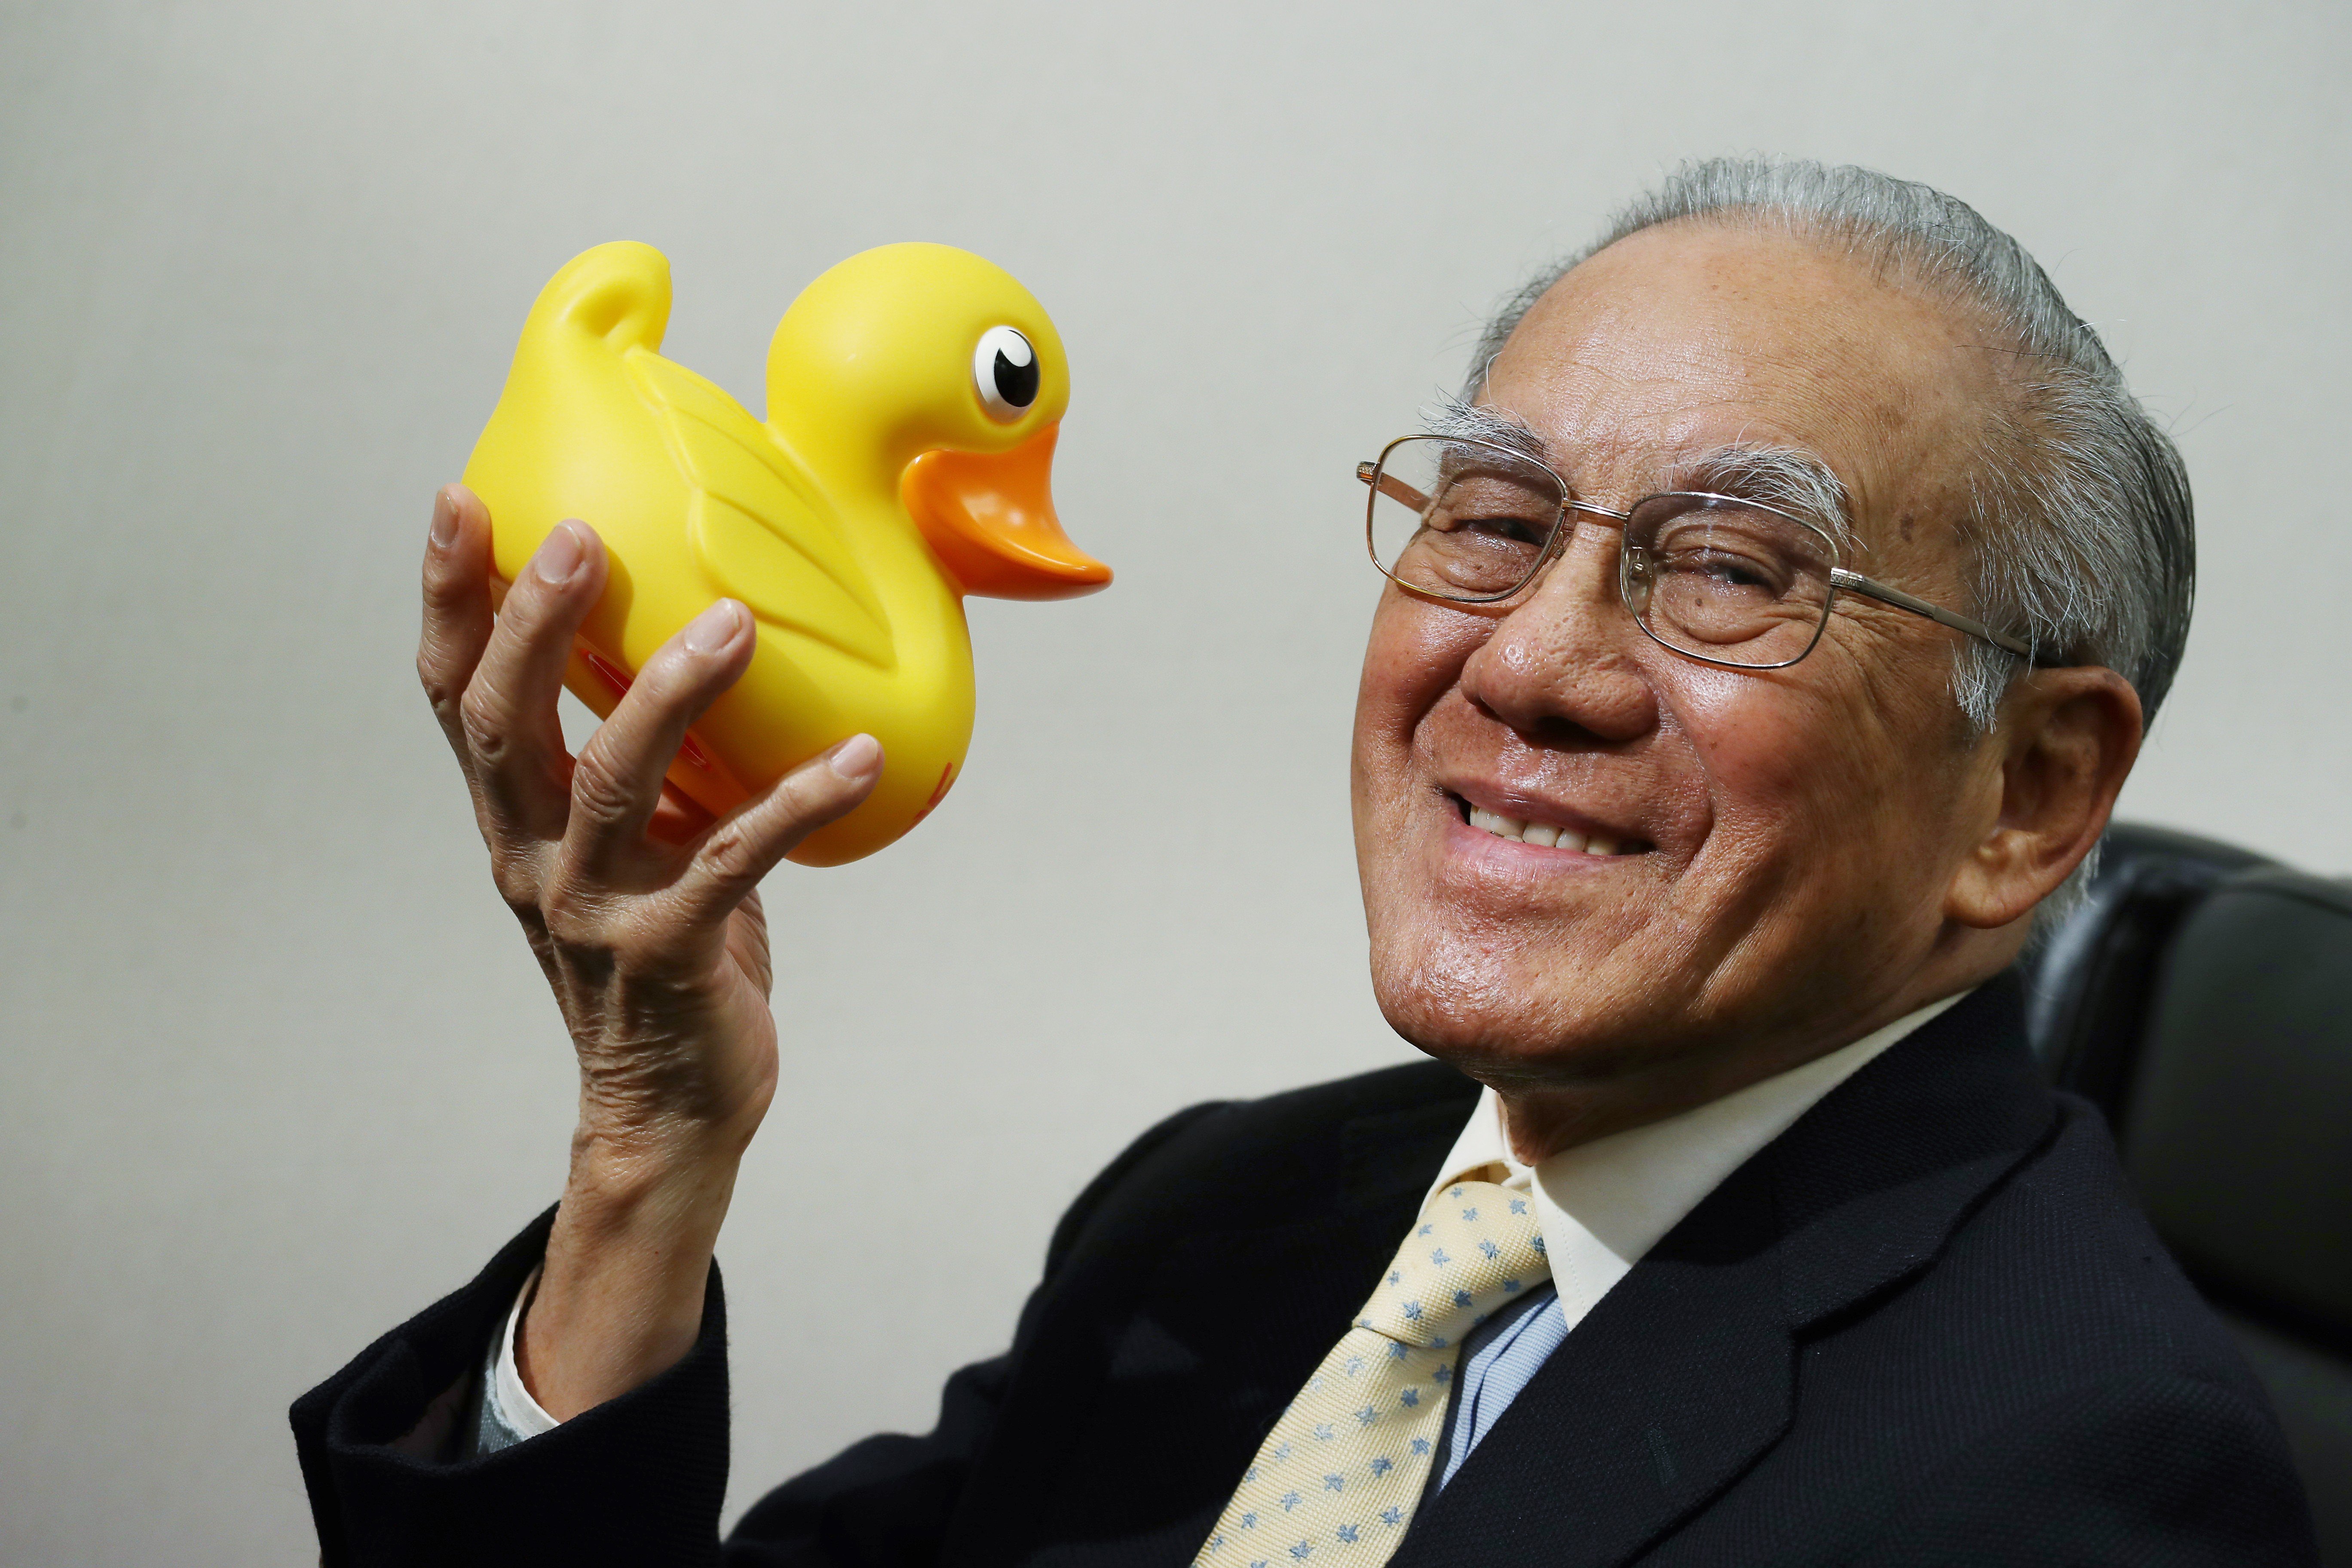 Hong Kong toy industrialist Lam Leung-tim came up with the rubber duck toy in 1948 invention rubber duck toy. Photo: Nora Tam